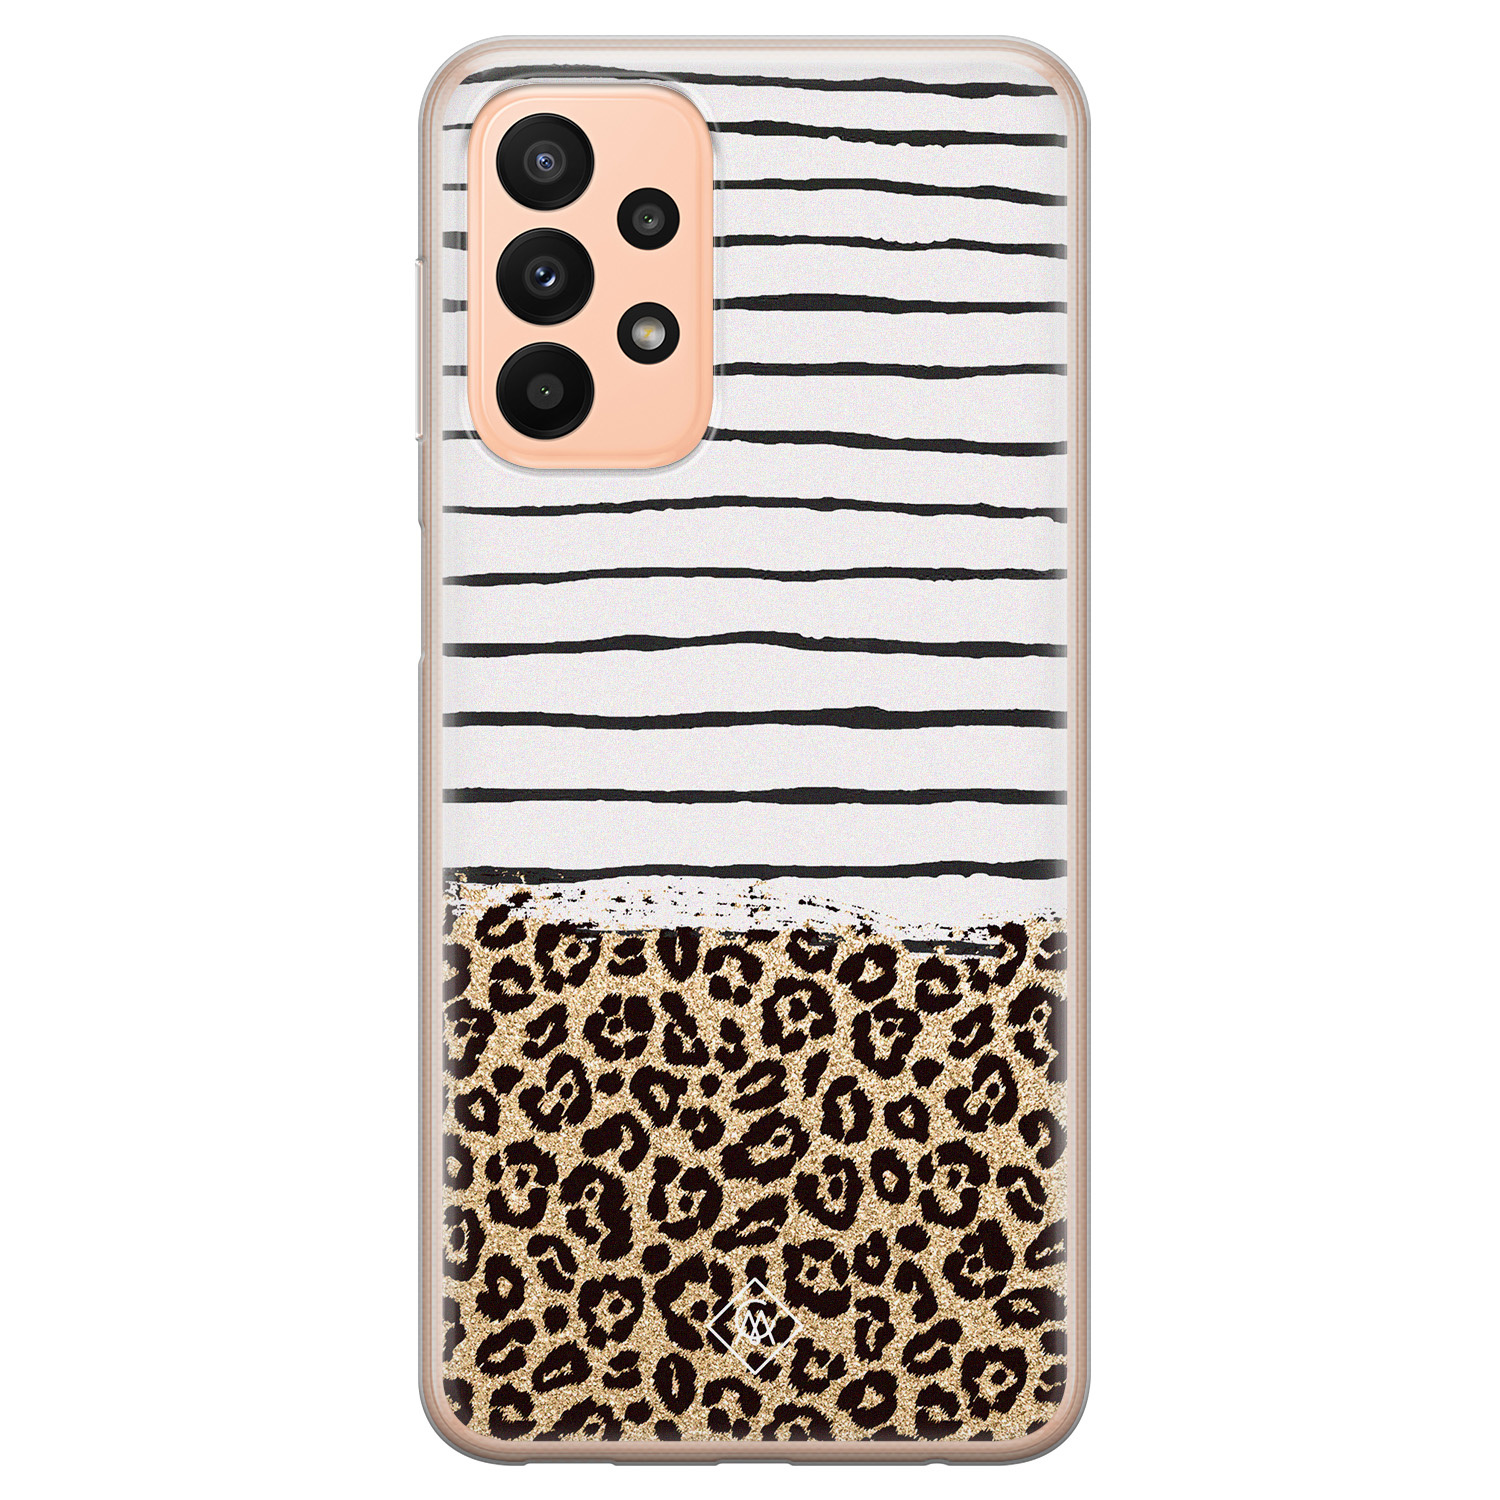 Samsung A23 hoesje siliconen - Luipaard strepen | Samsung Galaxy A23 case | Bruin/beige | TPU backcover transparant